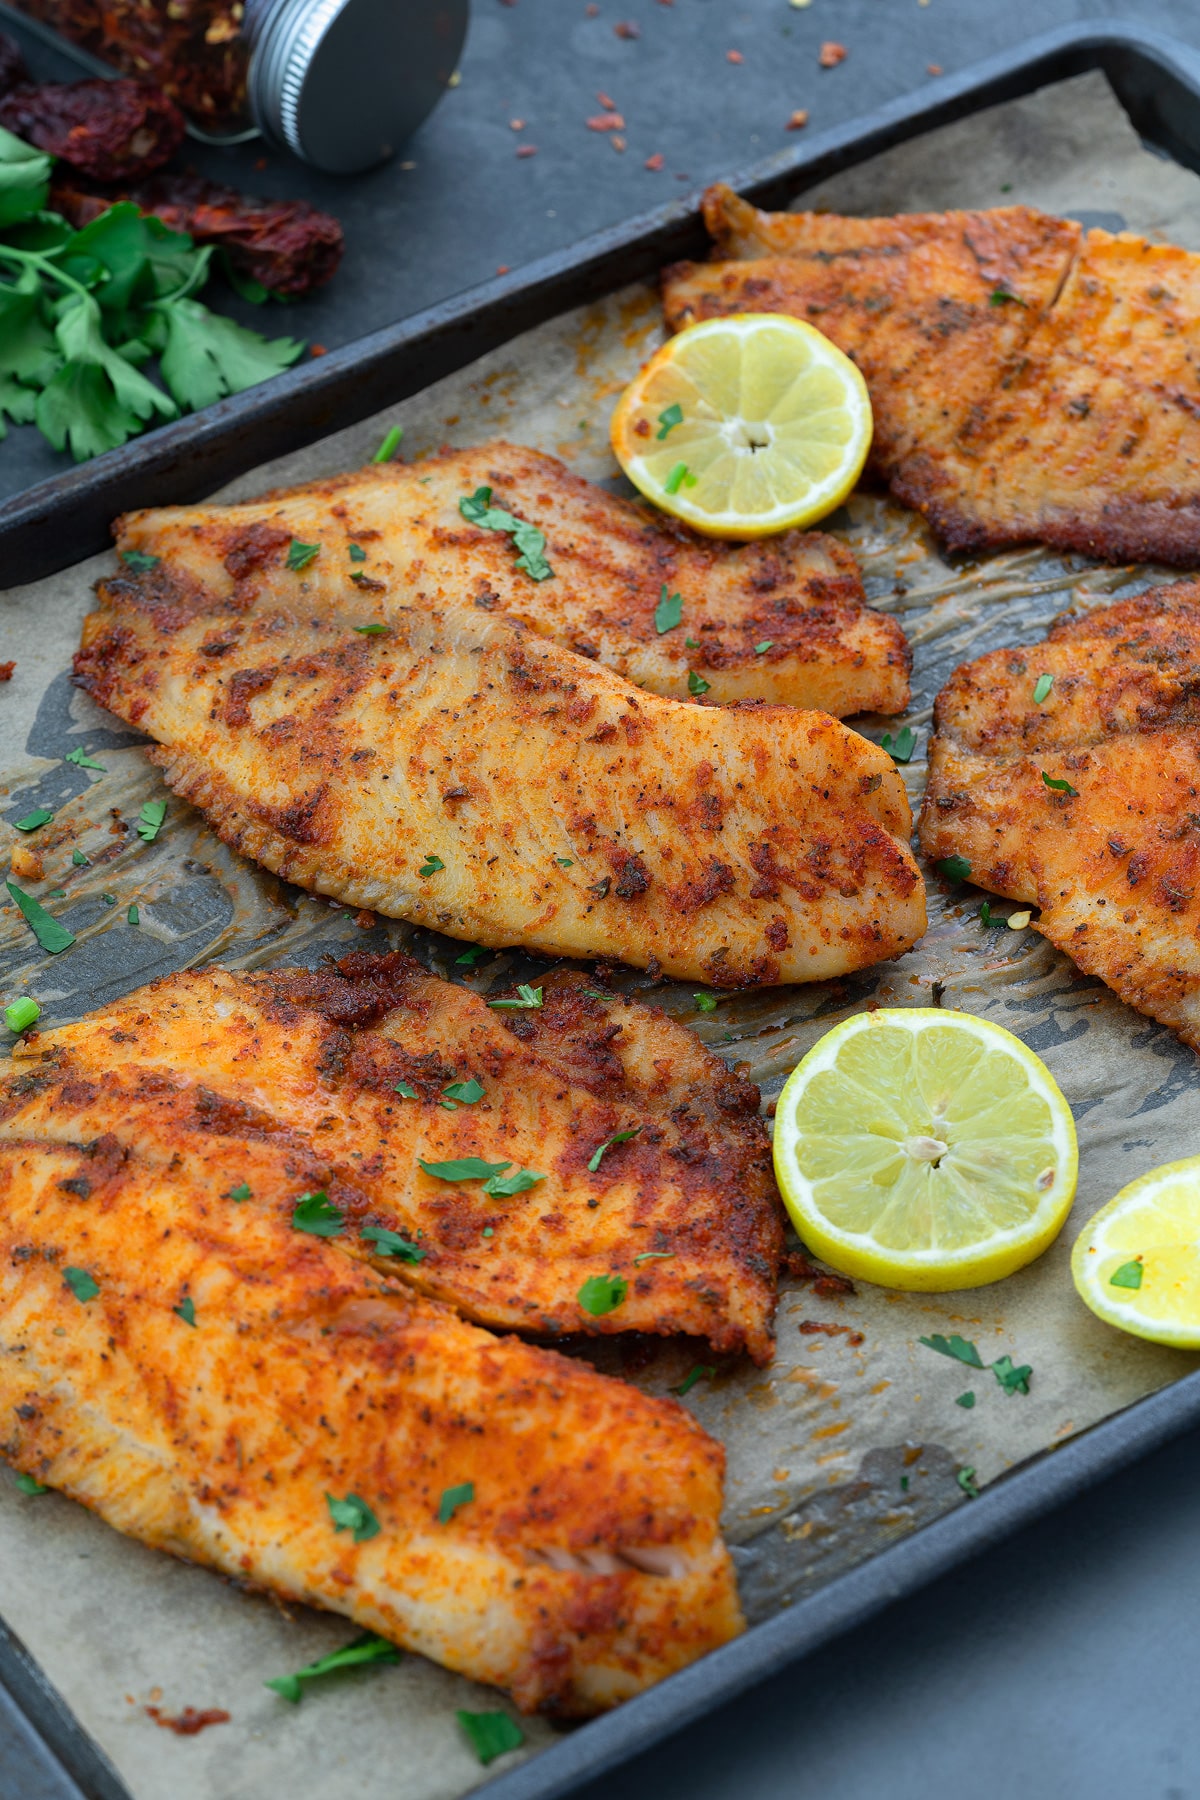 Oven Baked Tilapia in a baking tray with lemon slices, and few ingredients scattered around.